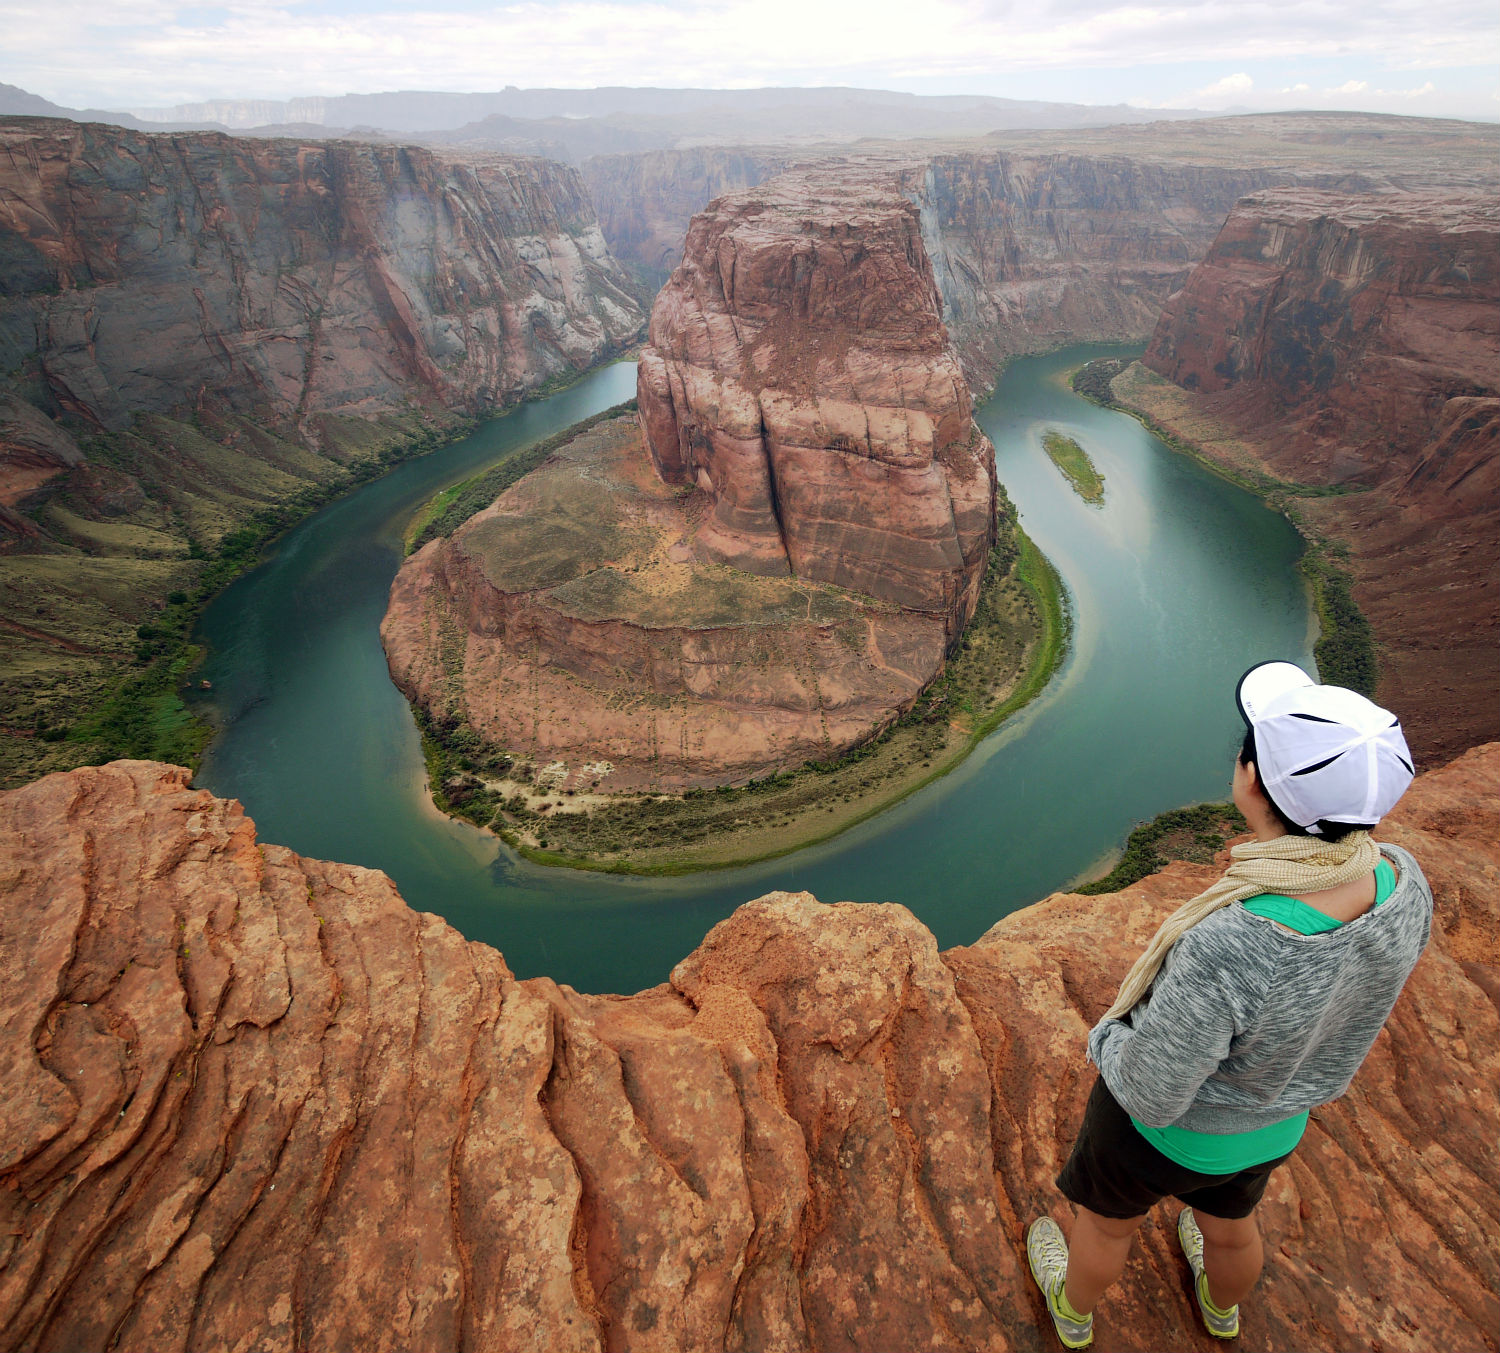 The Colorado River flows far through the famous Horseshoe Bend in Page, Arizona.  Mikel Ortega / Moment / Getty Images